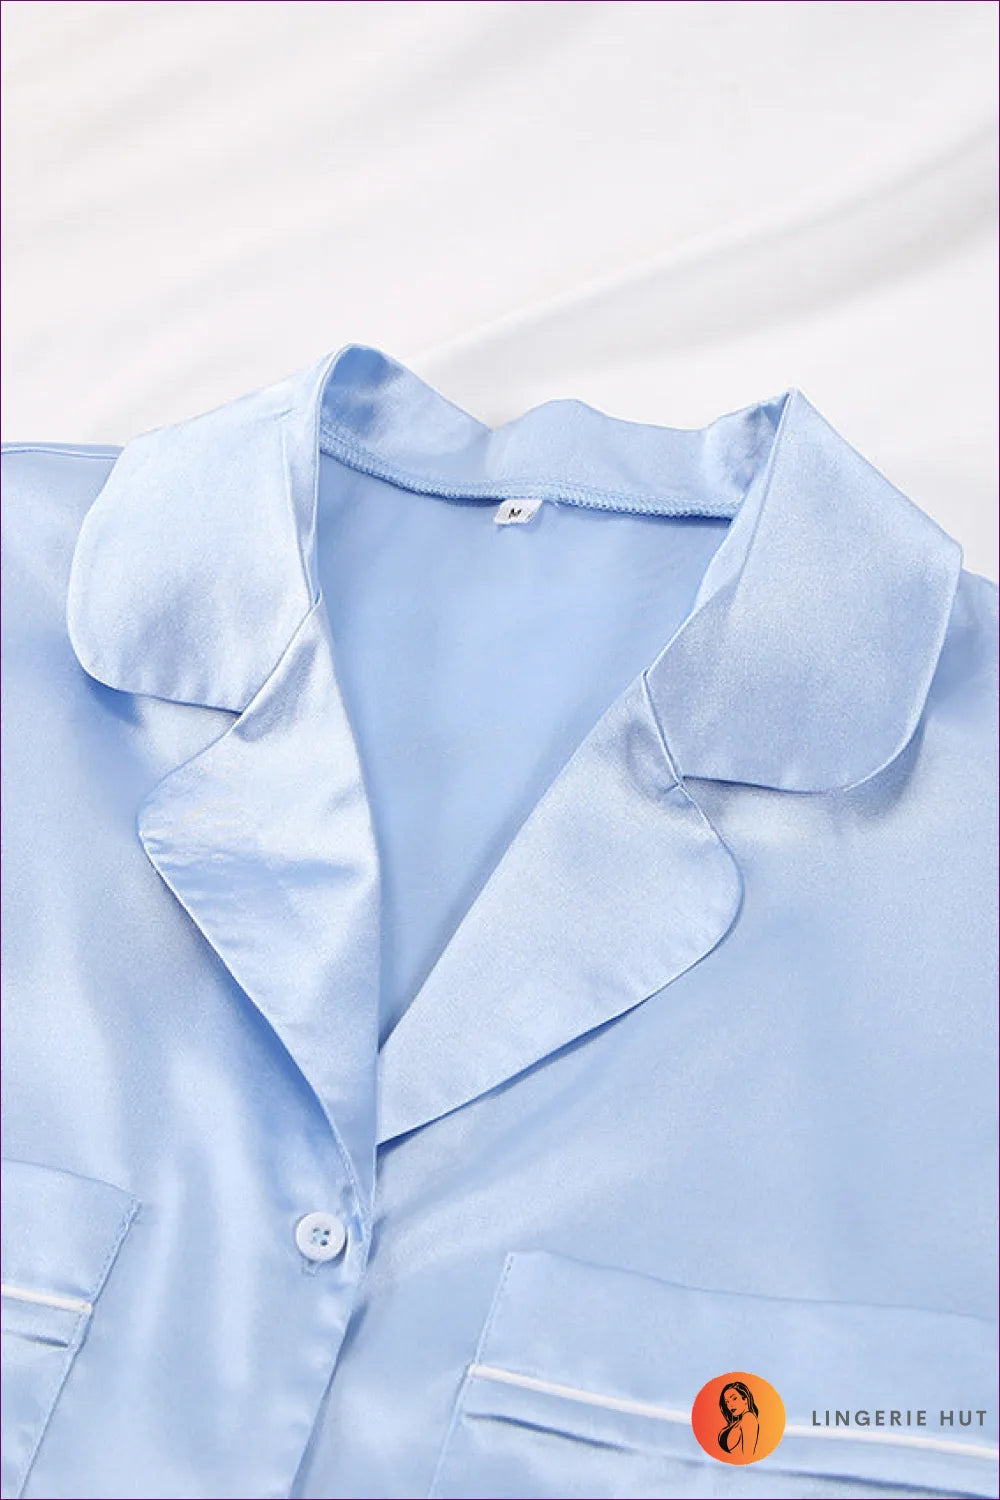 Experience The Perfect Blend Of Comfort And Elegance With Our Satin Button Up Feather Trim Pyjama Set. Crafted